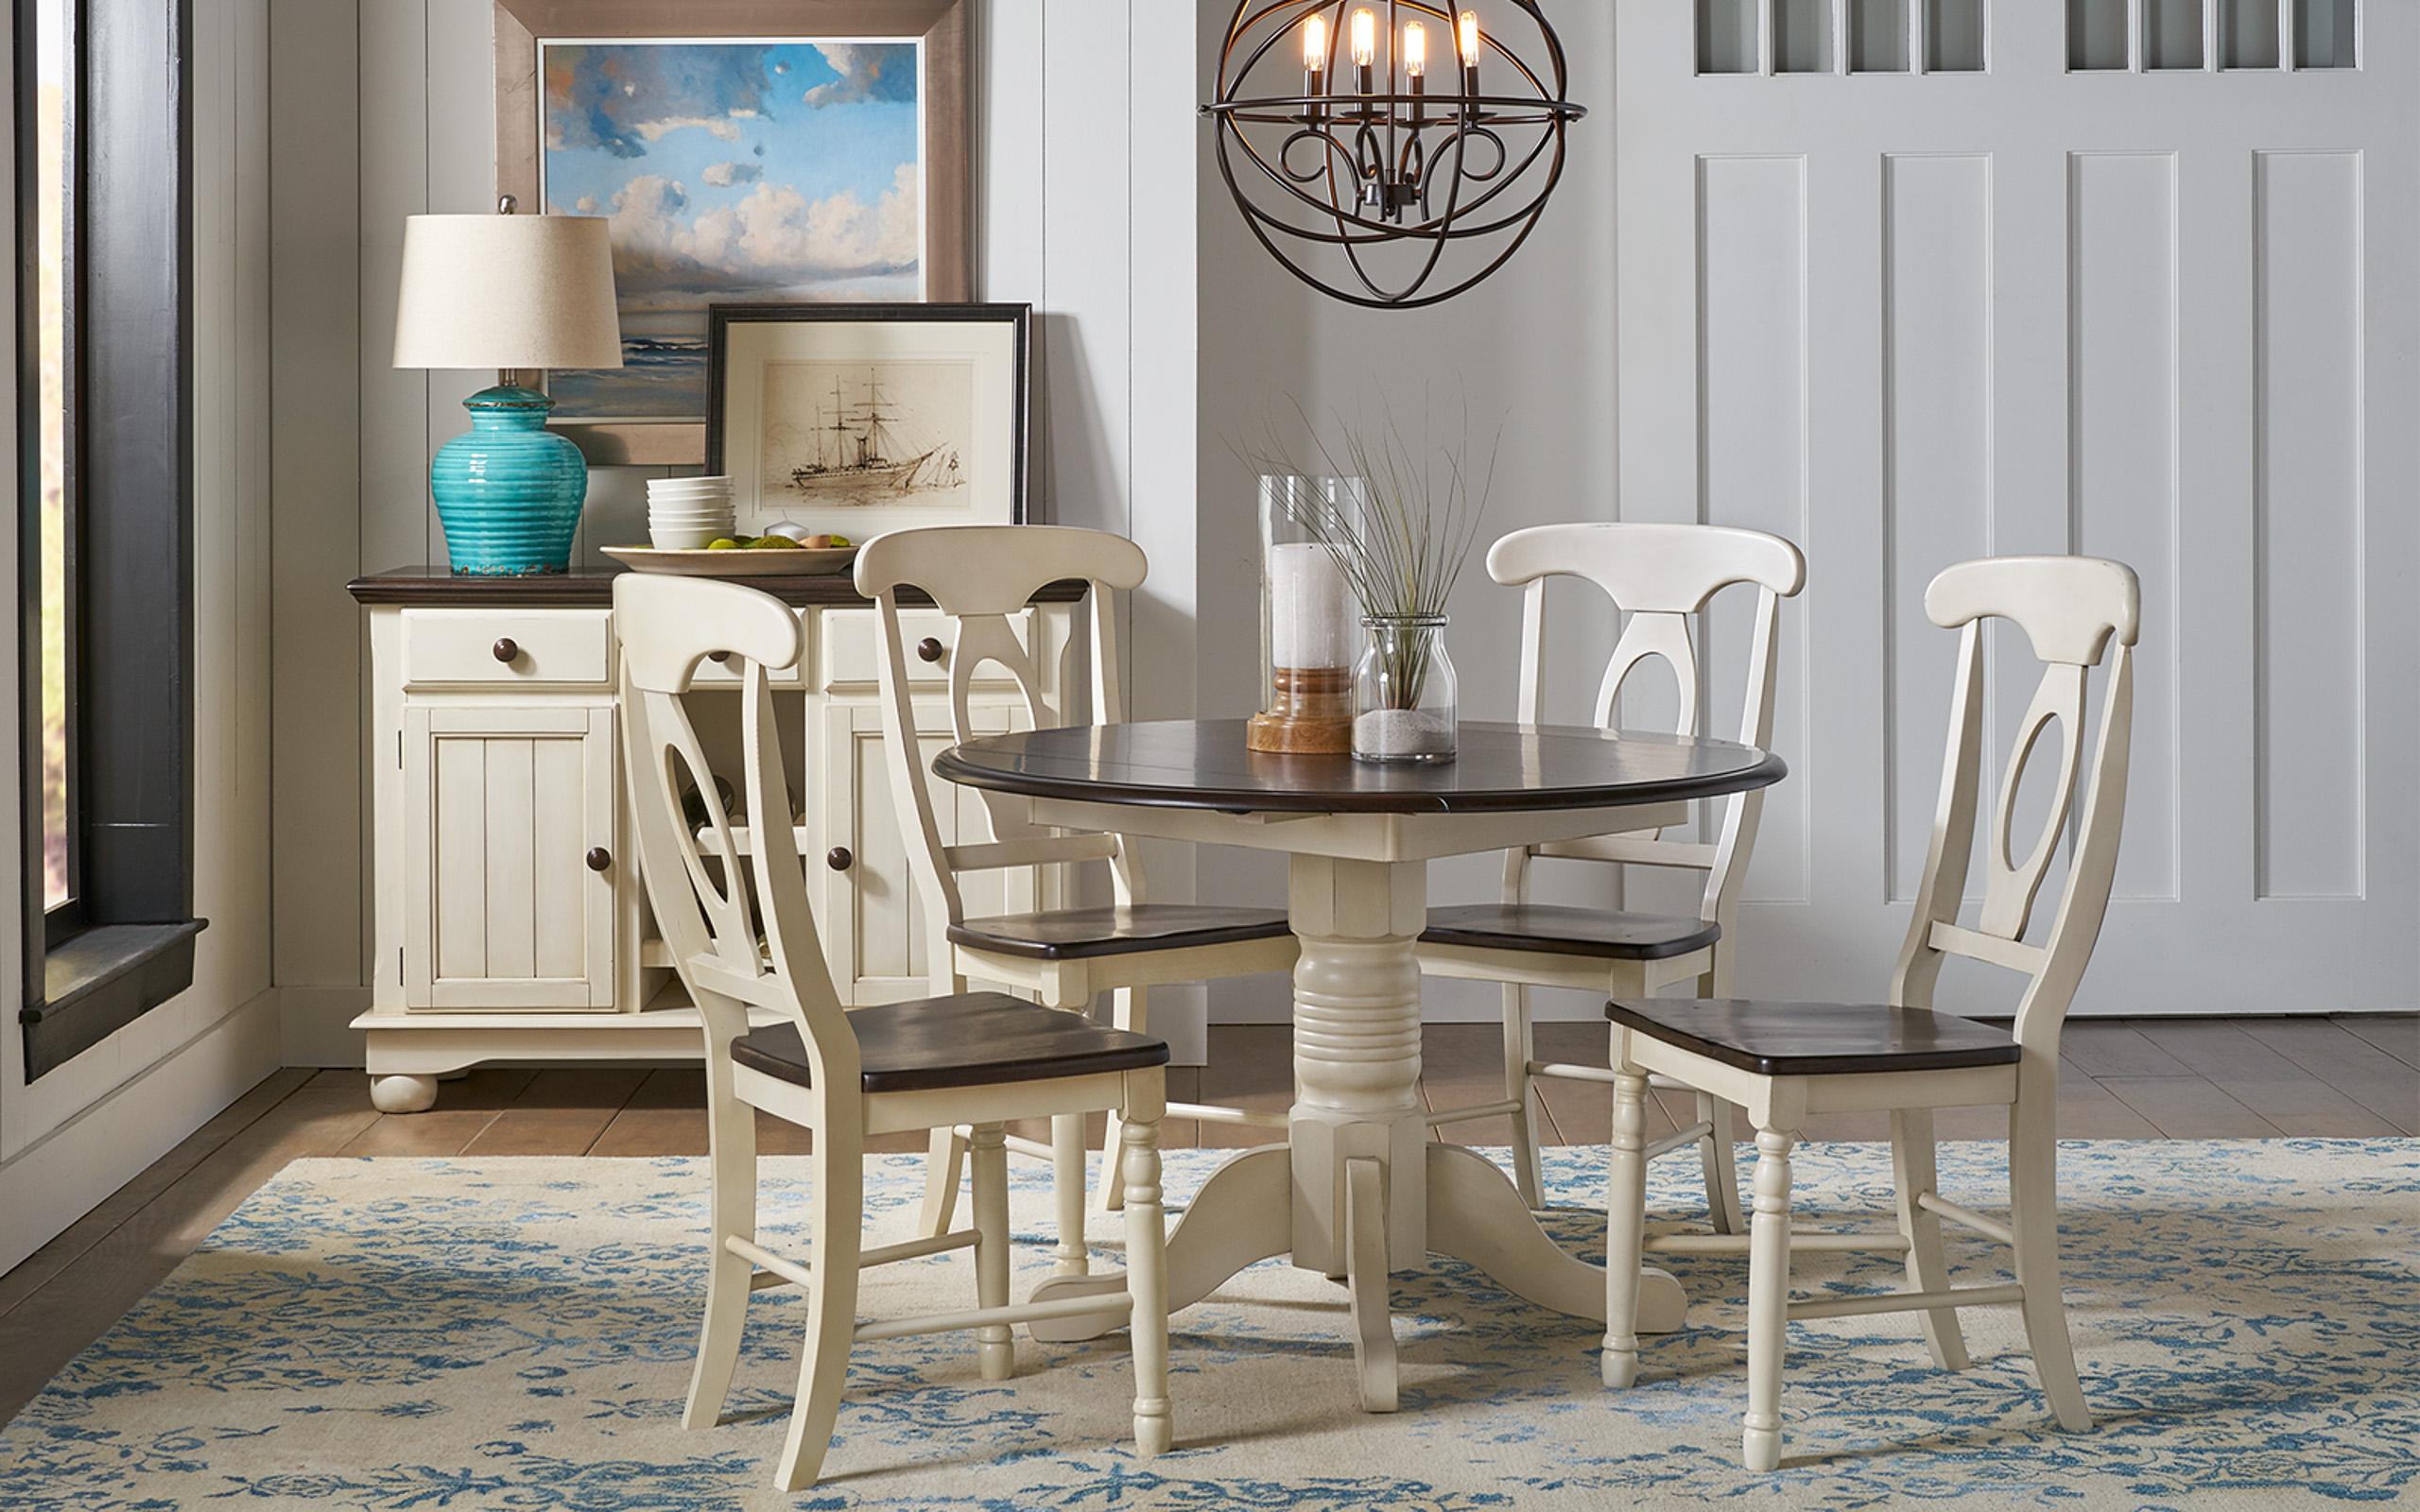 Rustic Dining Table Set British Isles CO BRICO6100-Set-5 in Brown, White 